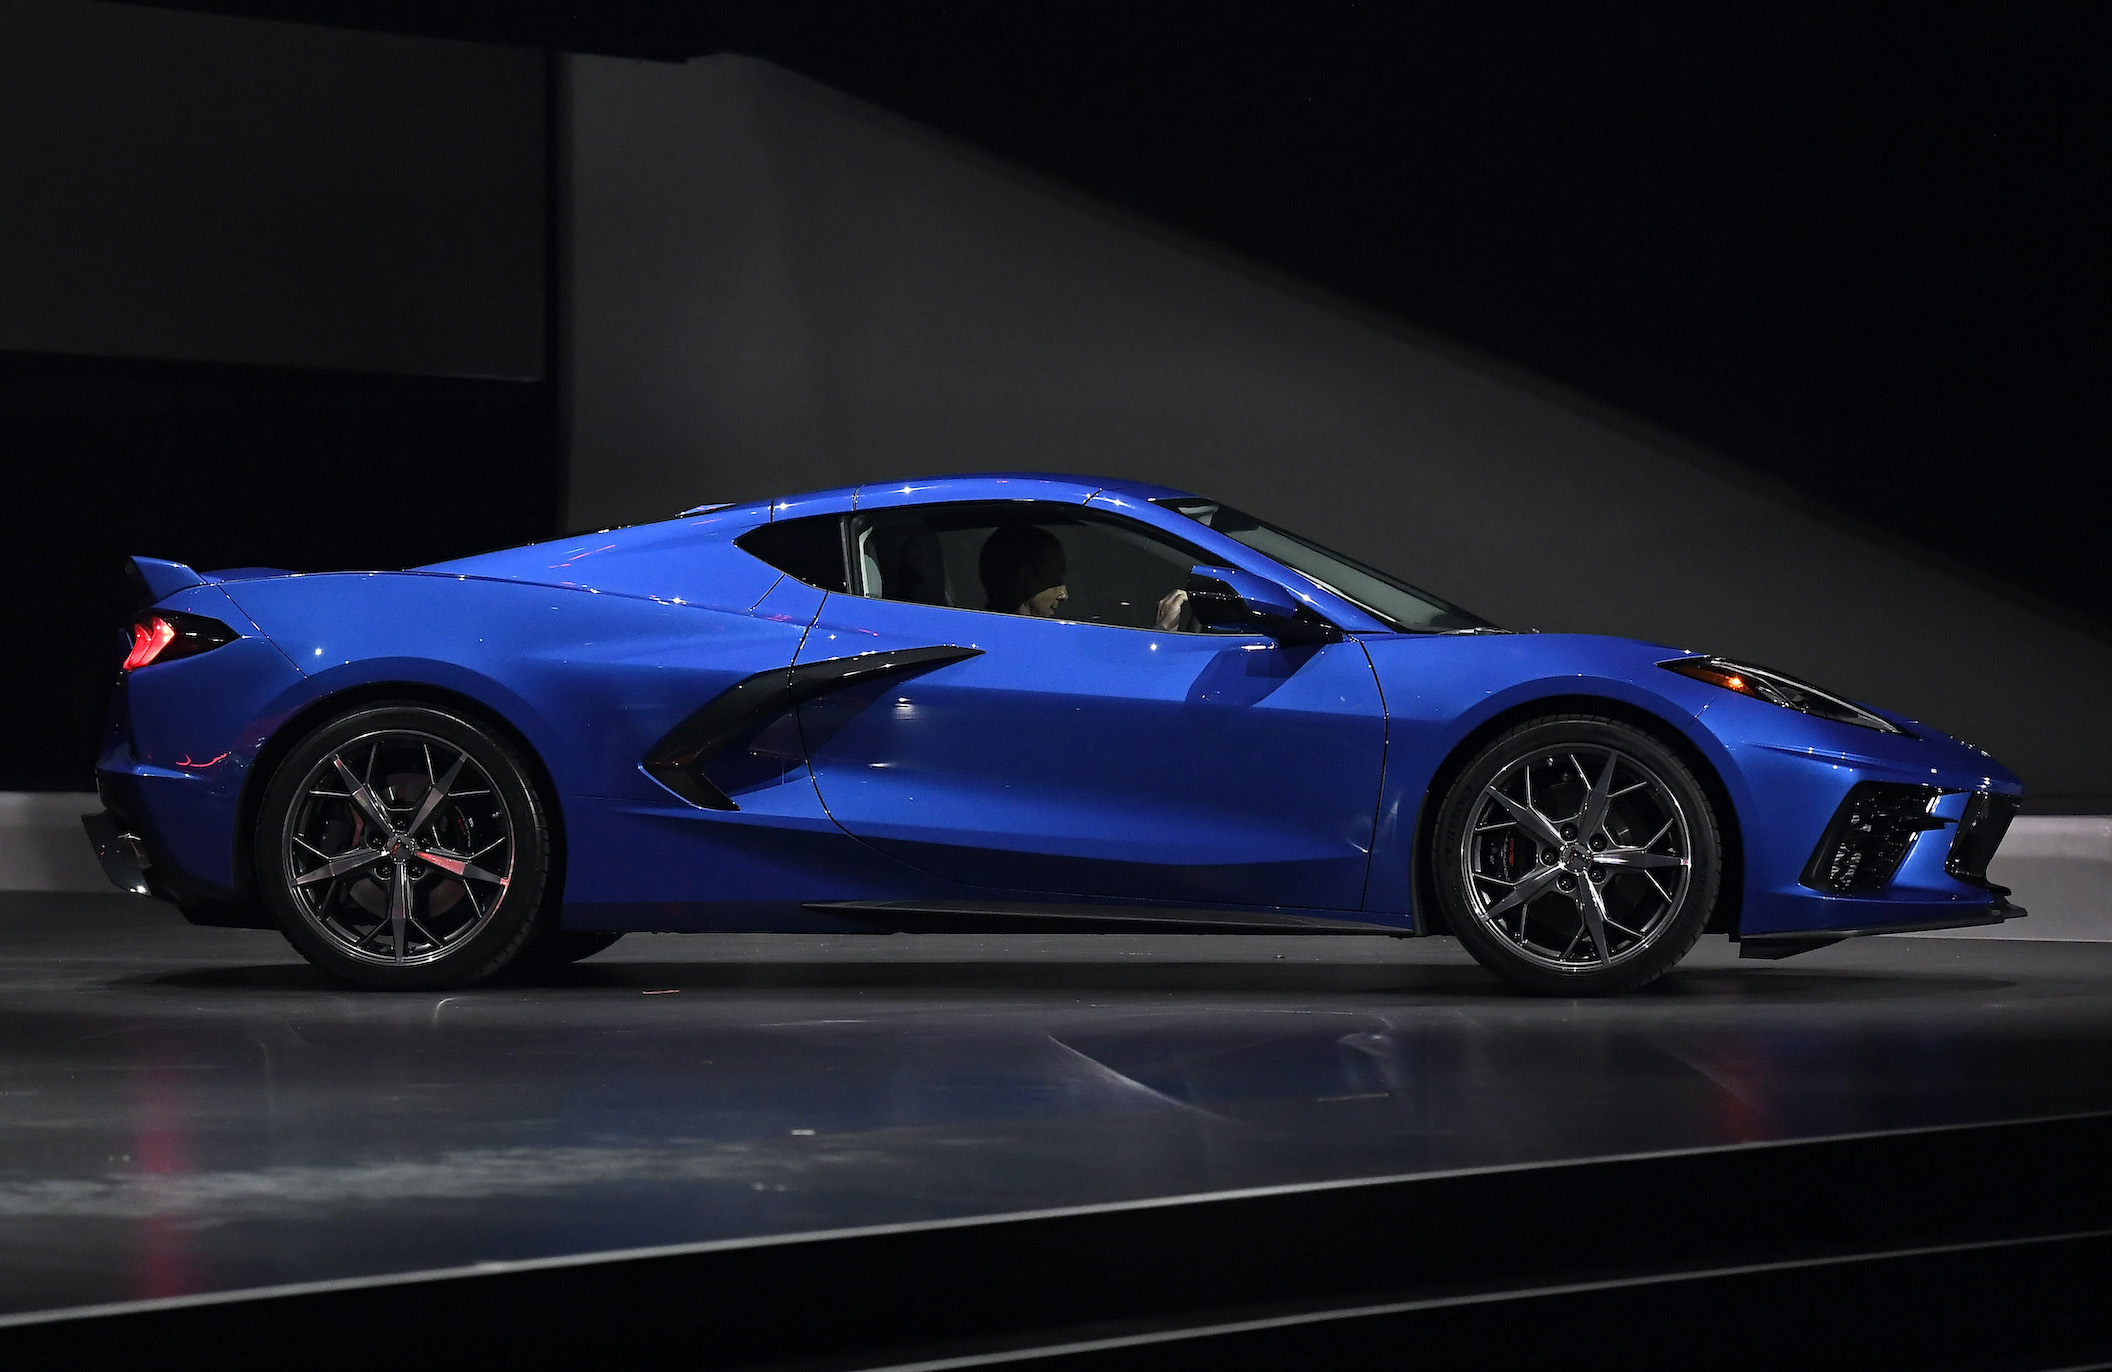 The 2020 mid-engine C8 Corvette Stingray by General Motors is unveiled during a news conference